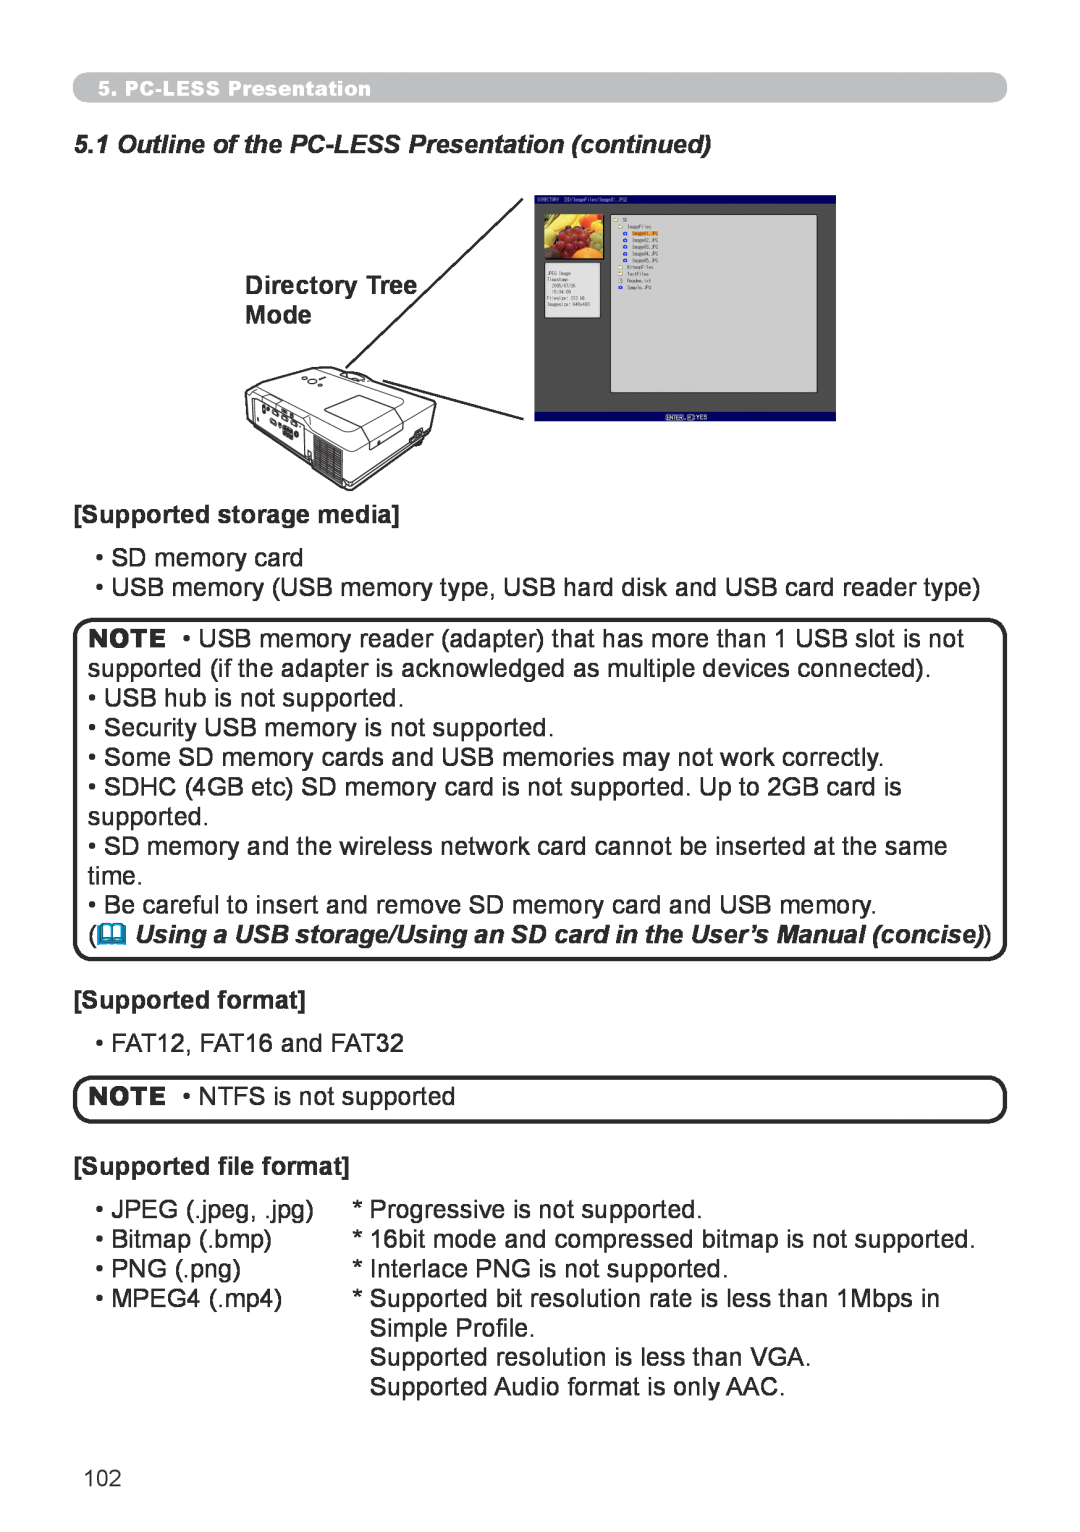 Hitachi CP-X267 user manual 5.1Outline of the PC-LESSPresentation continued, Directory Tree Mode Supported storage media 